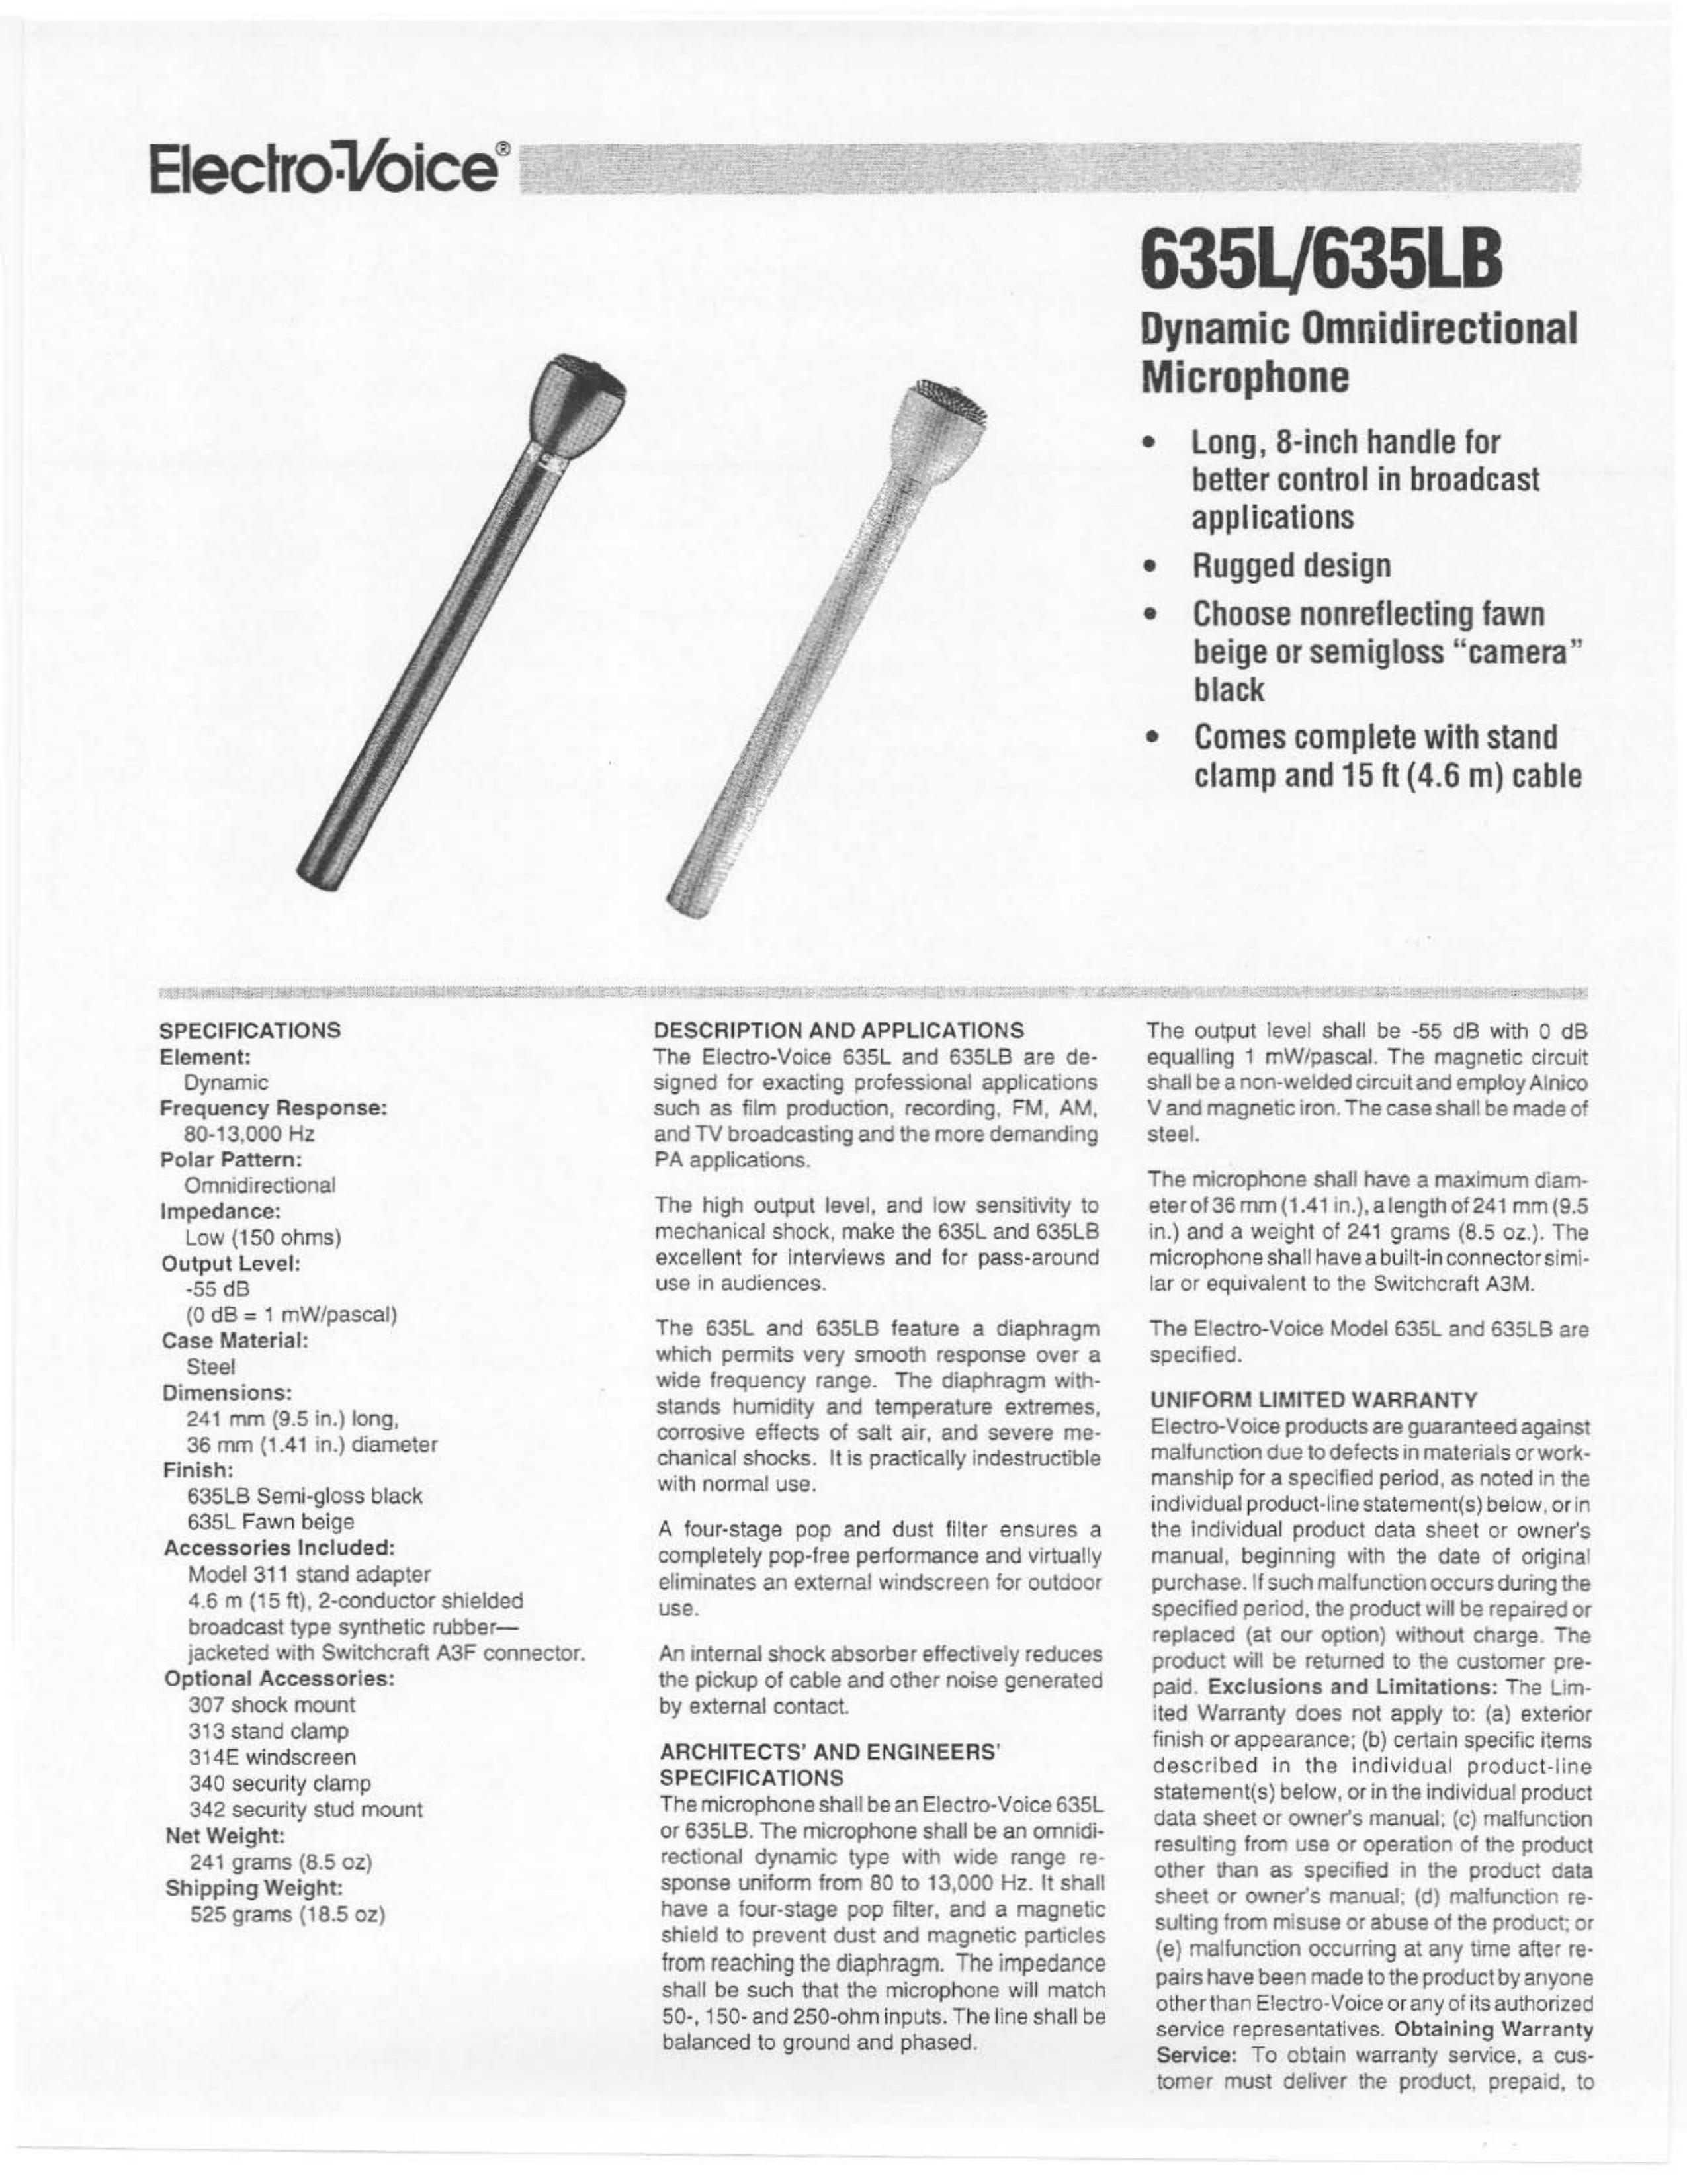 Electro-Voice 635L Microphone User Manual